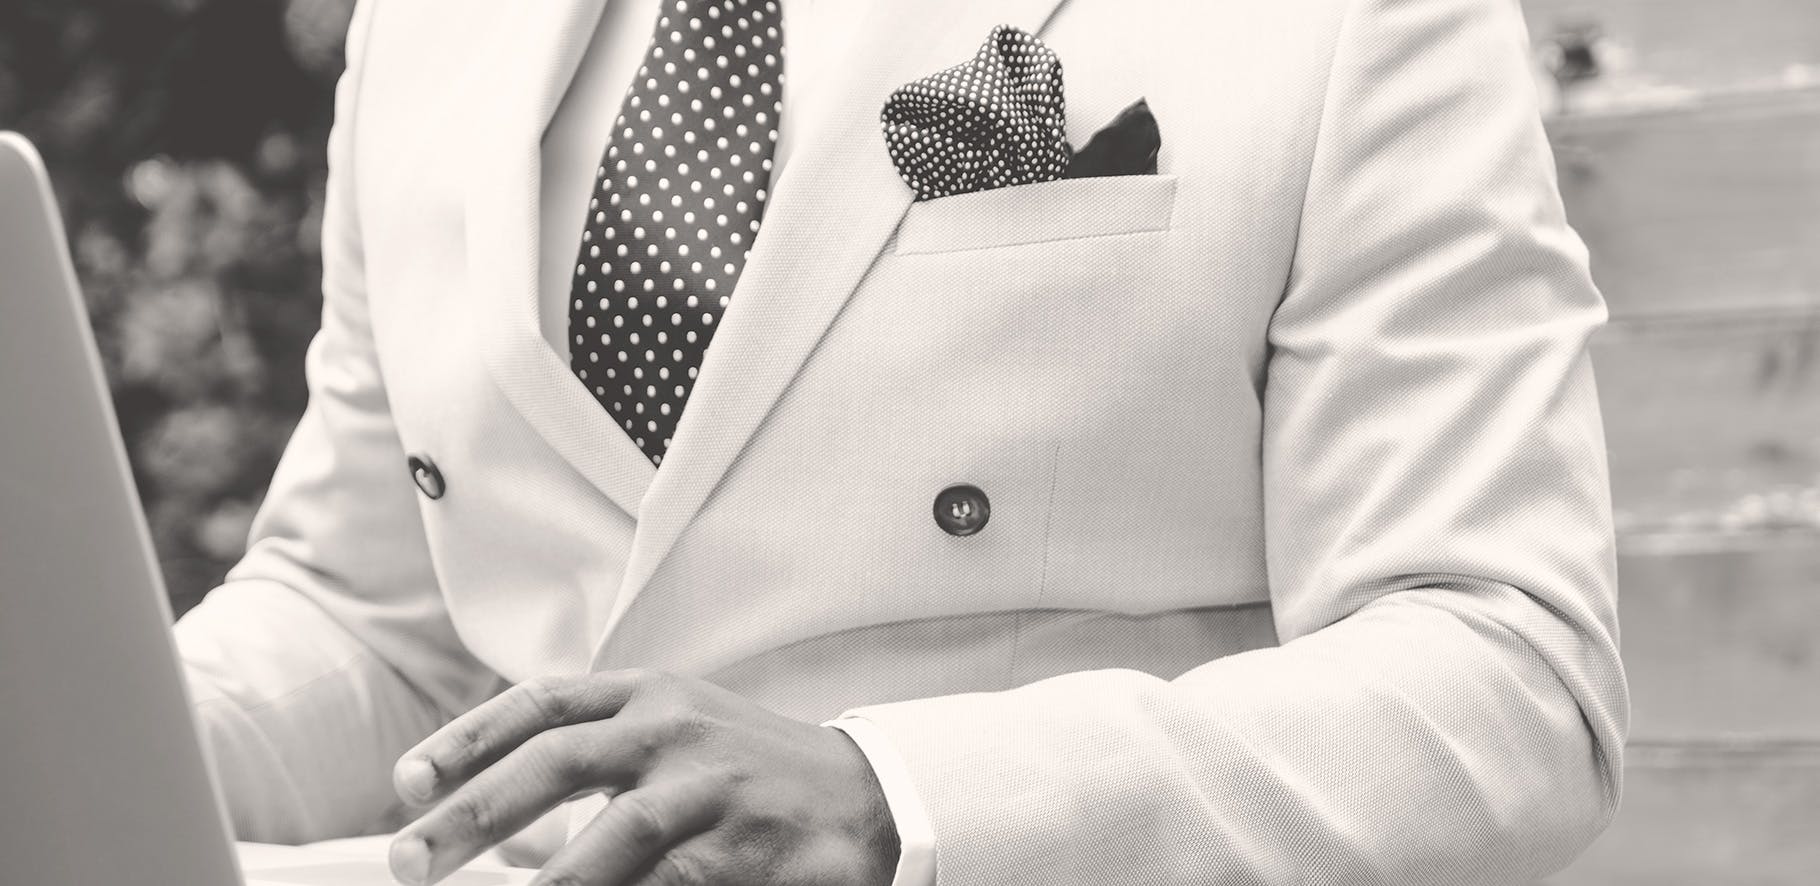 black and white image of a man wearing a classy white suit using a laptop.